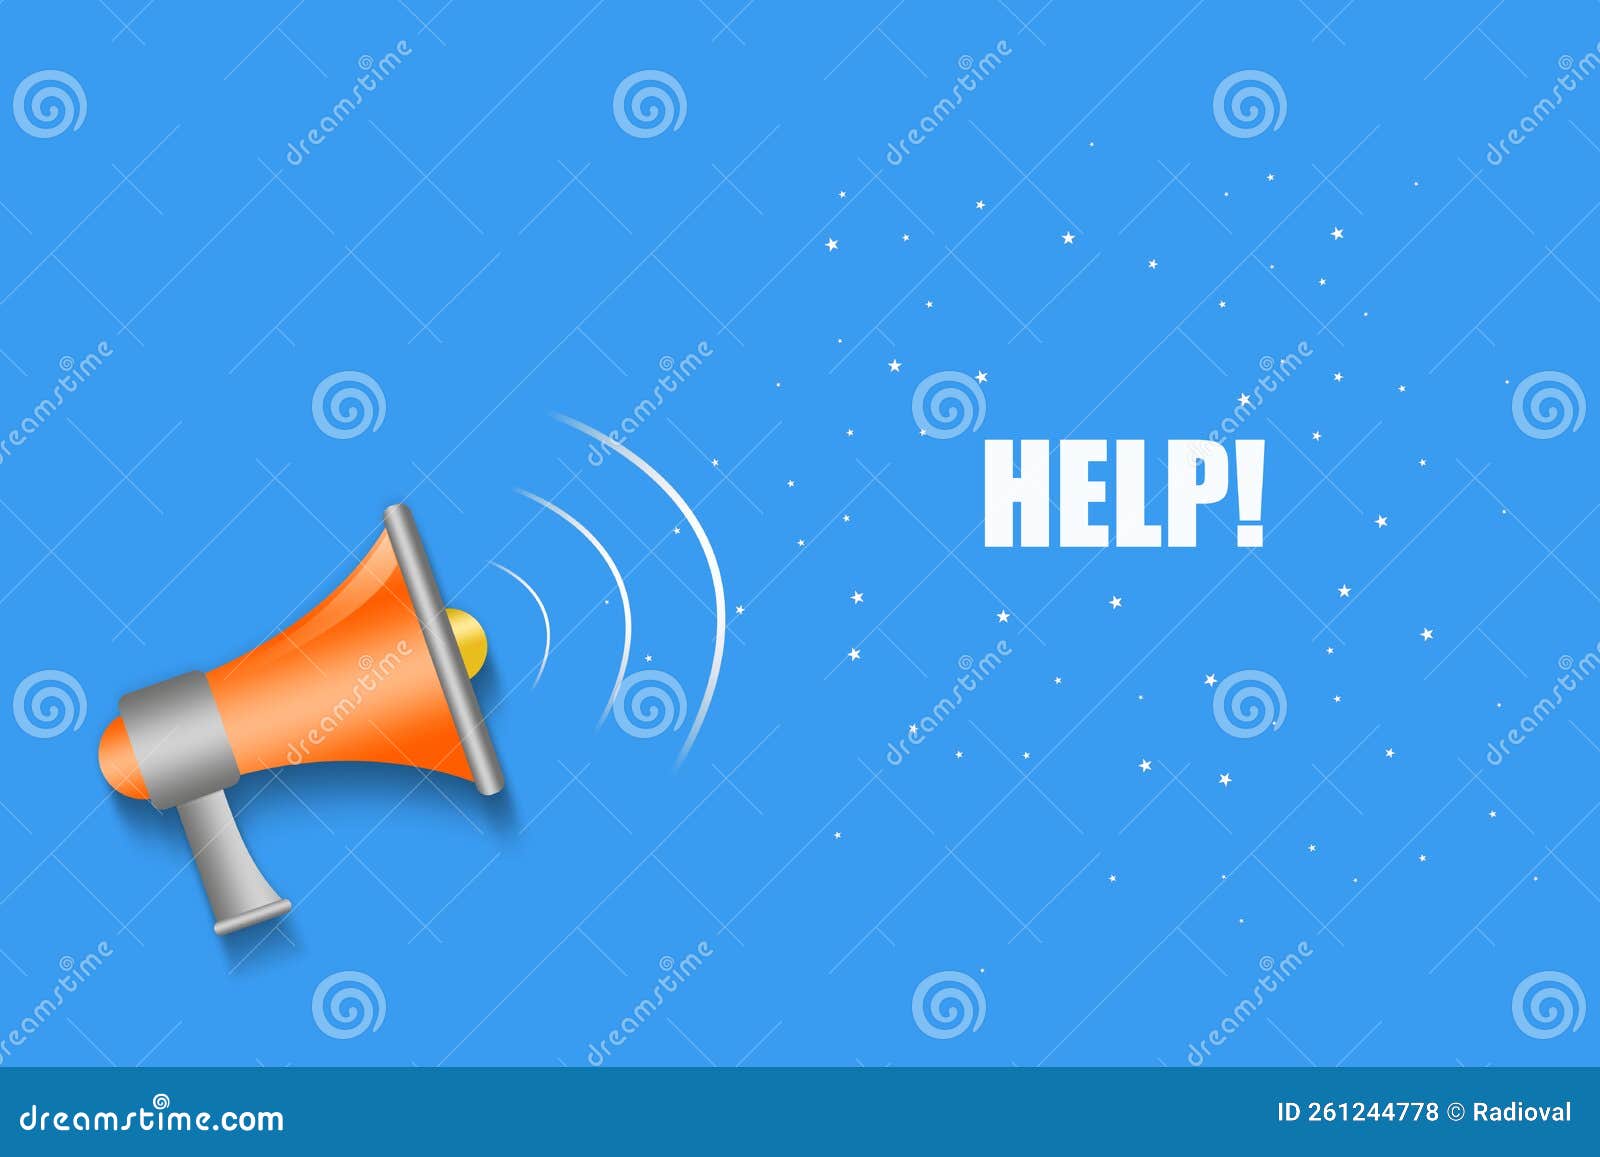 how-can-i-help-you-words-bulletin-board-question-stock-image